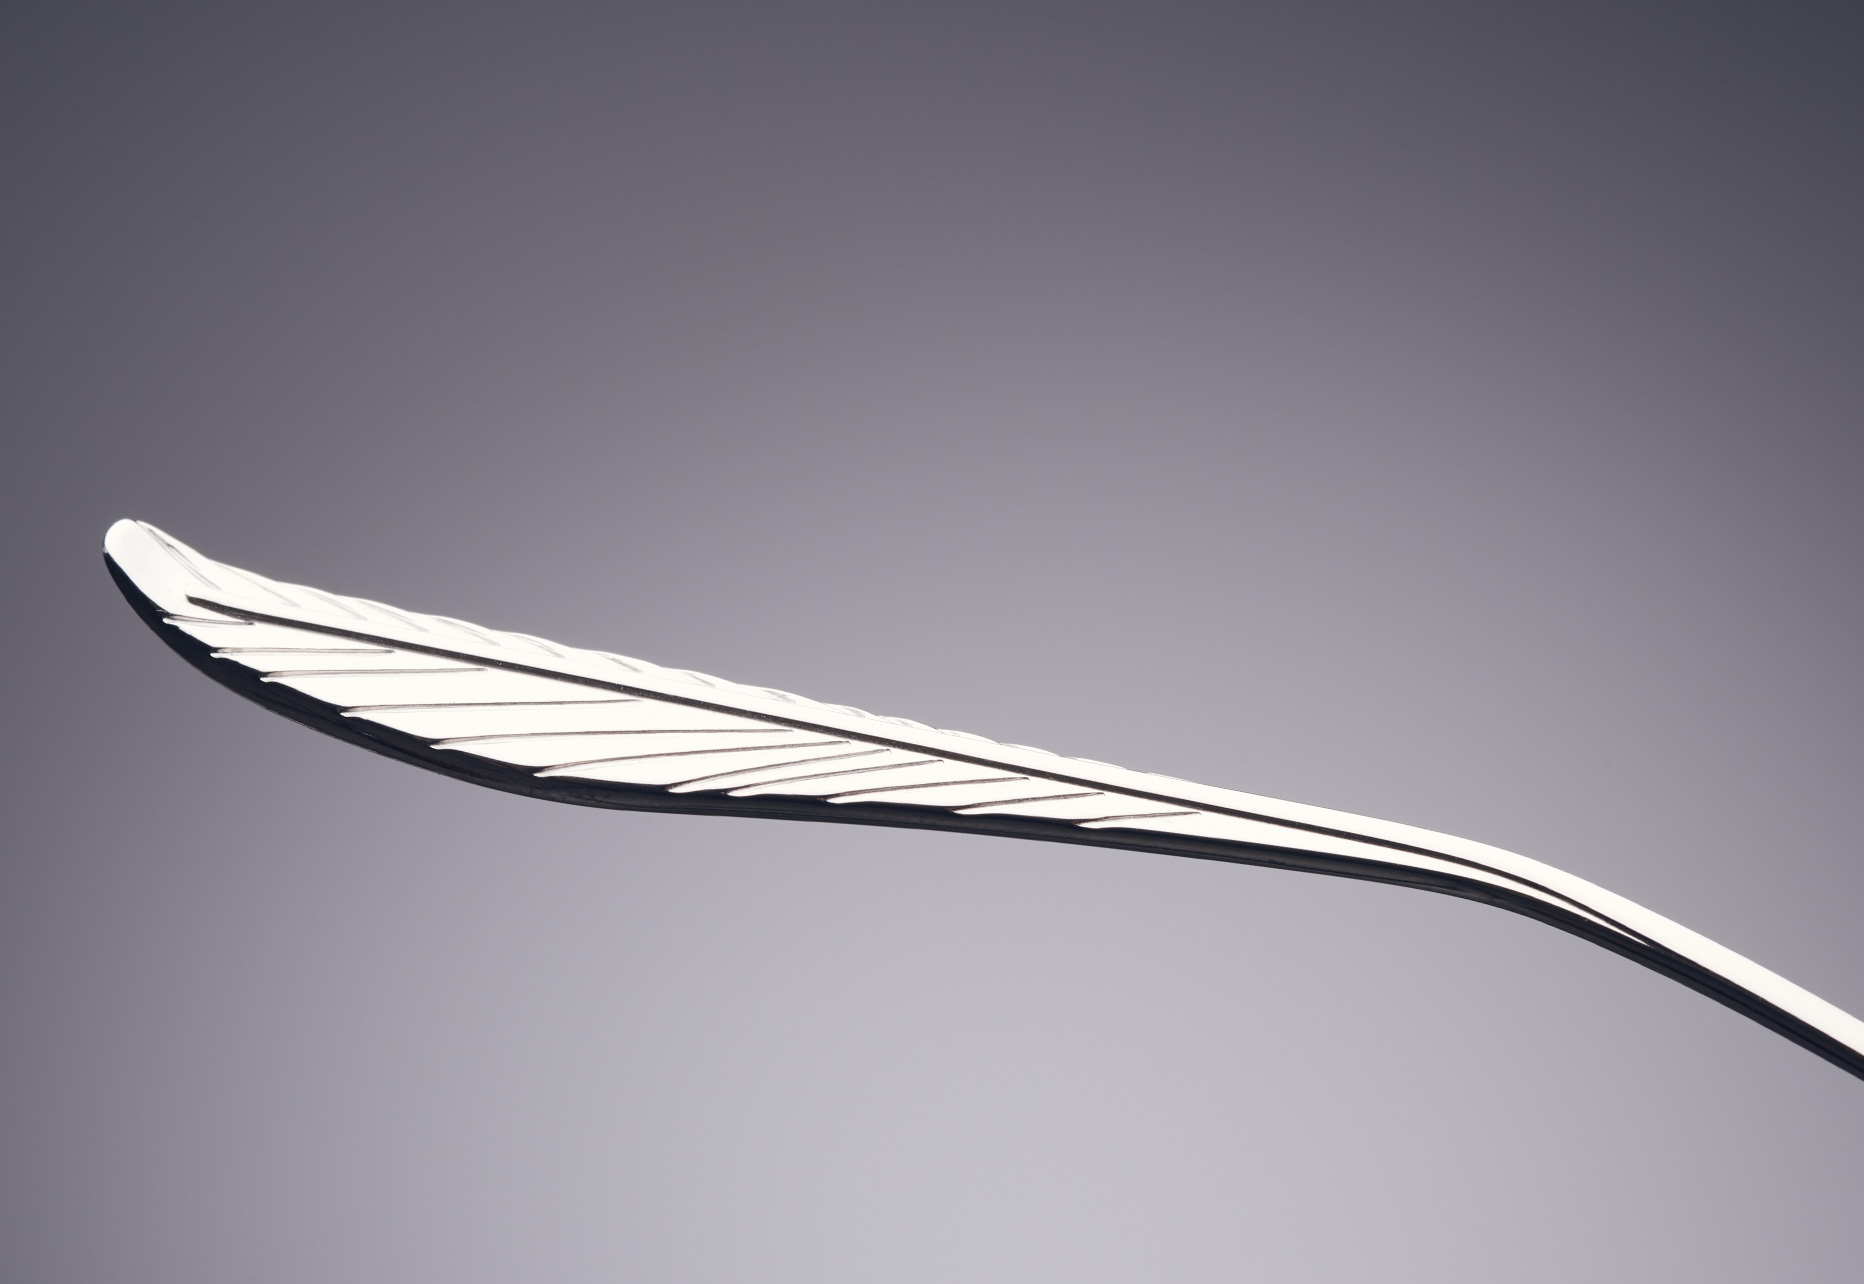 DITA METAMAT TEMPLE TIP DESIGN IS DELICATELY ETCHED TO RESEMBLE A FEATHER